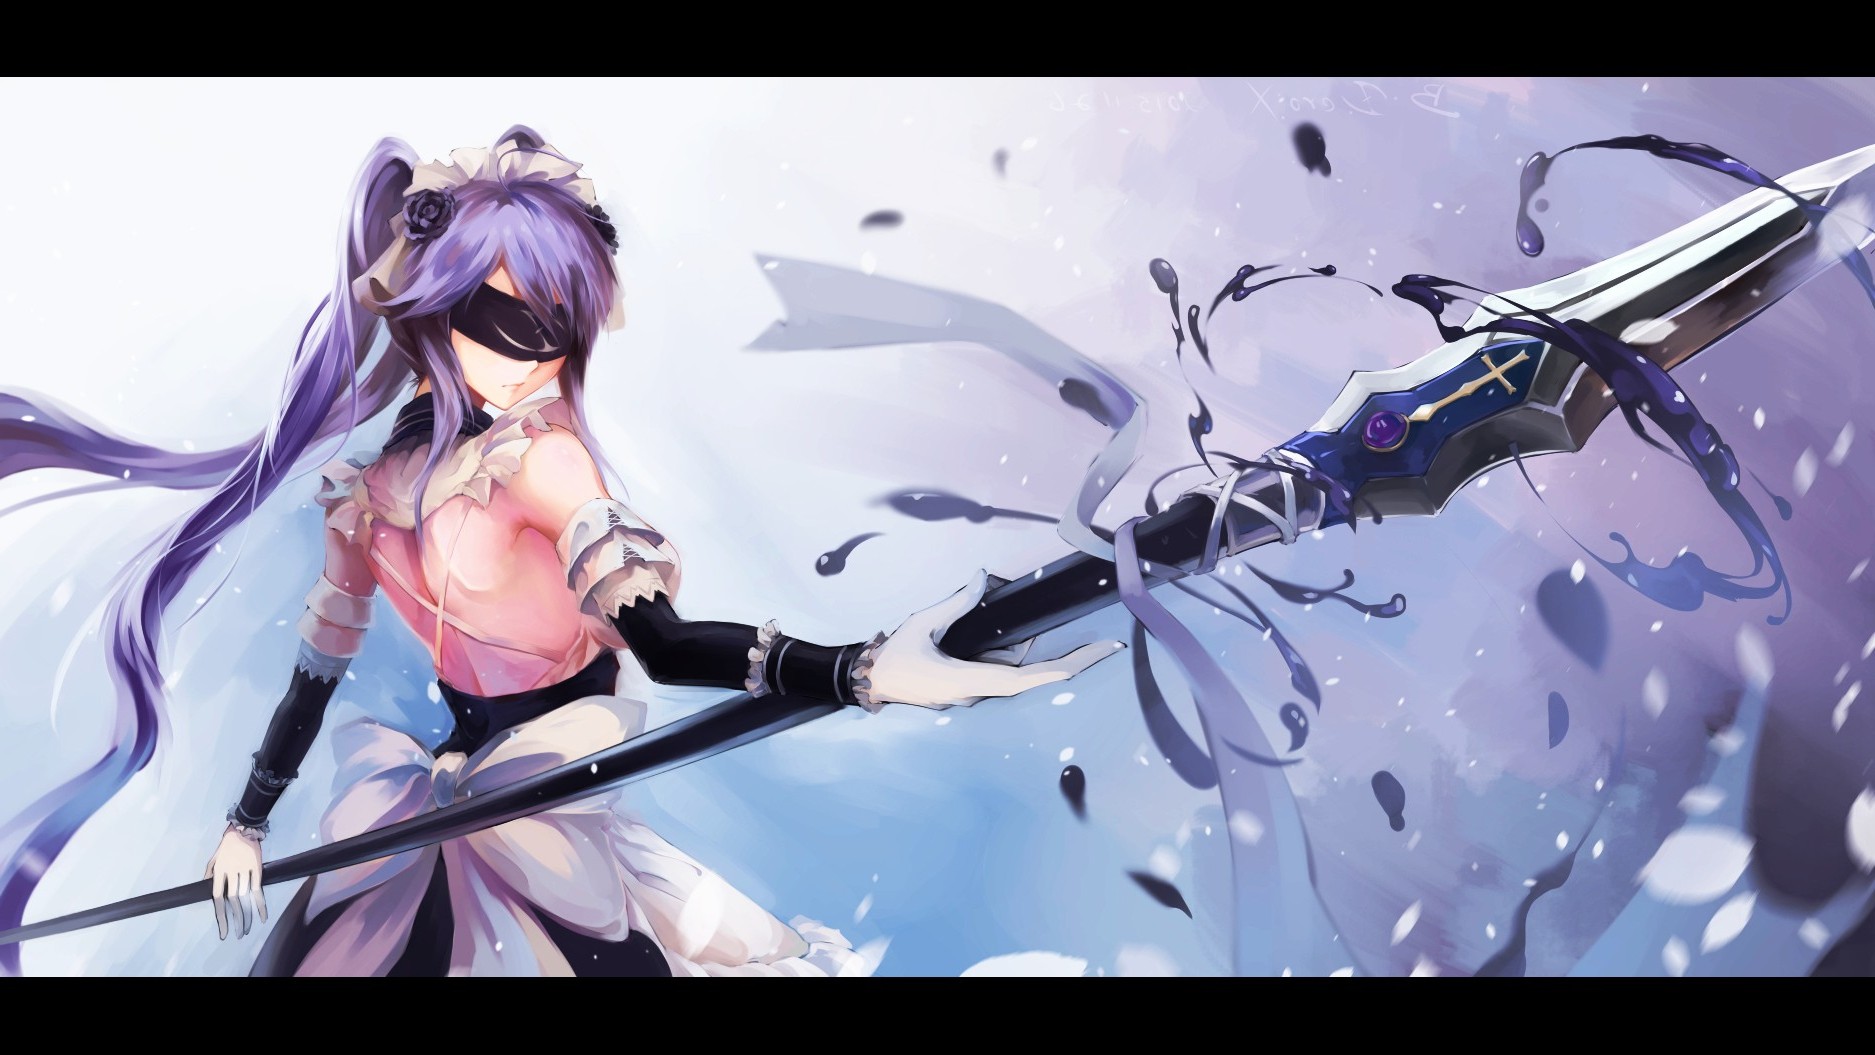 anime, Anime Girls, Blindfold, Spear, Weapon, Purple Hair, Twintails, Original Characters Wallpaper